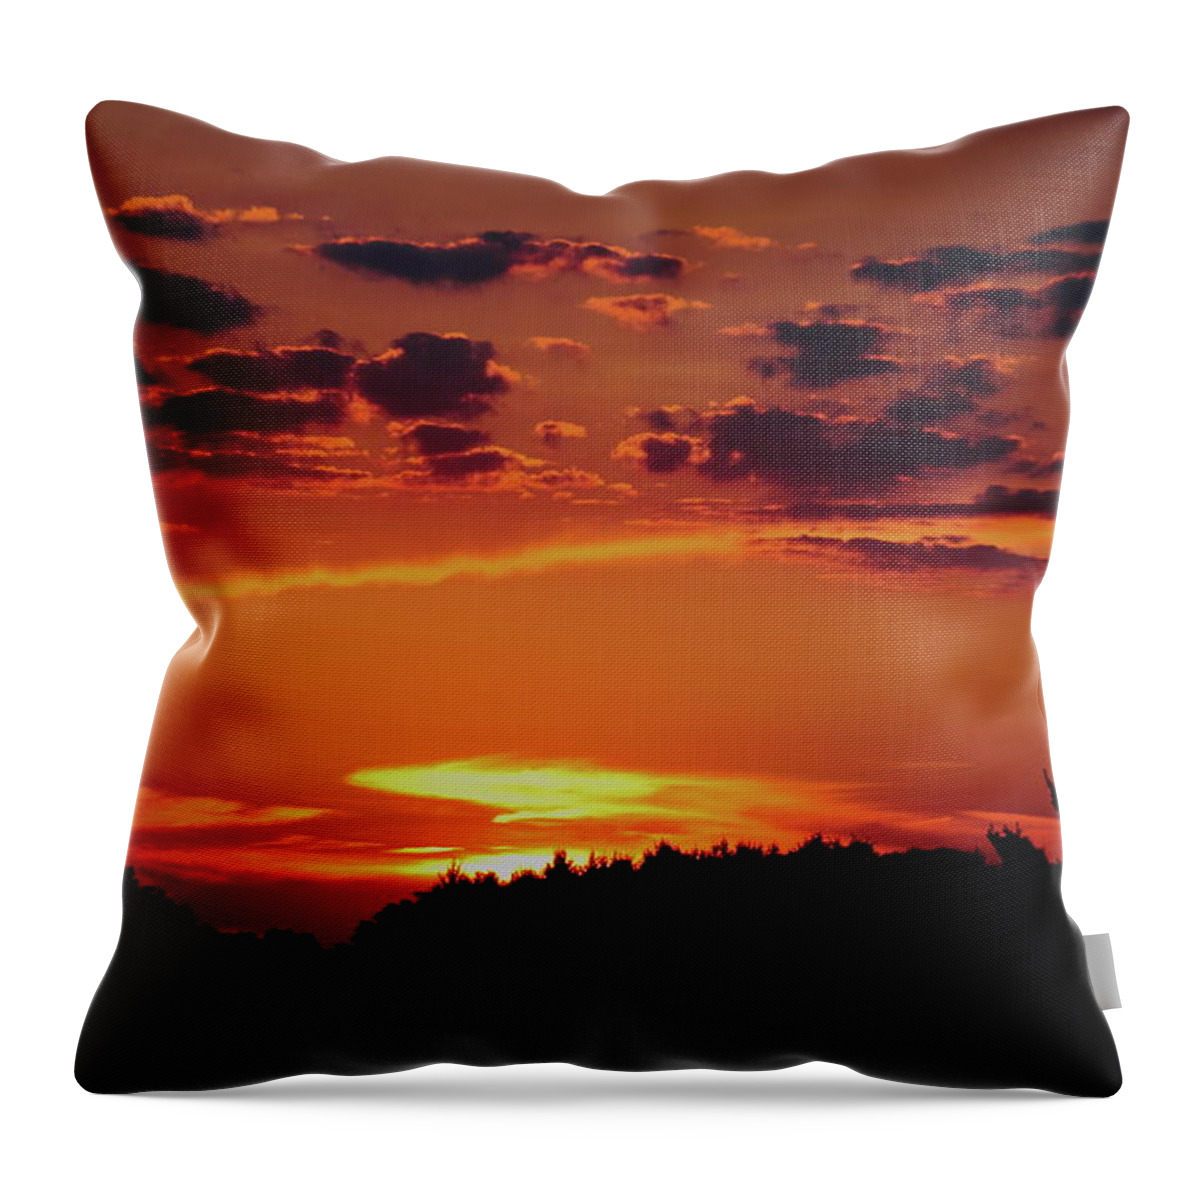 Sunset Throw Pillow featuring the photograph Sadie's Sunset by Bruce Patrick Smith